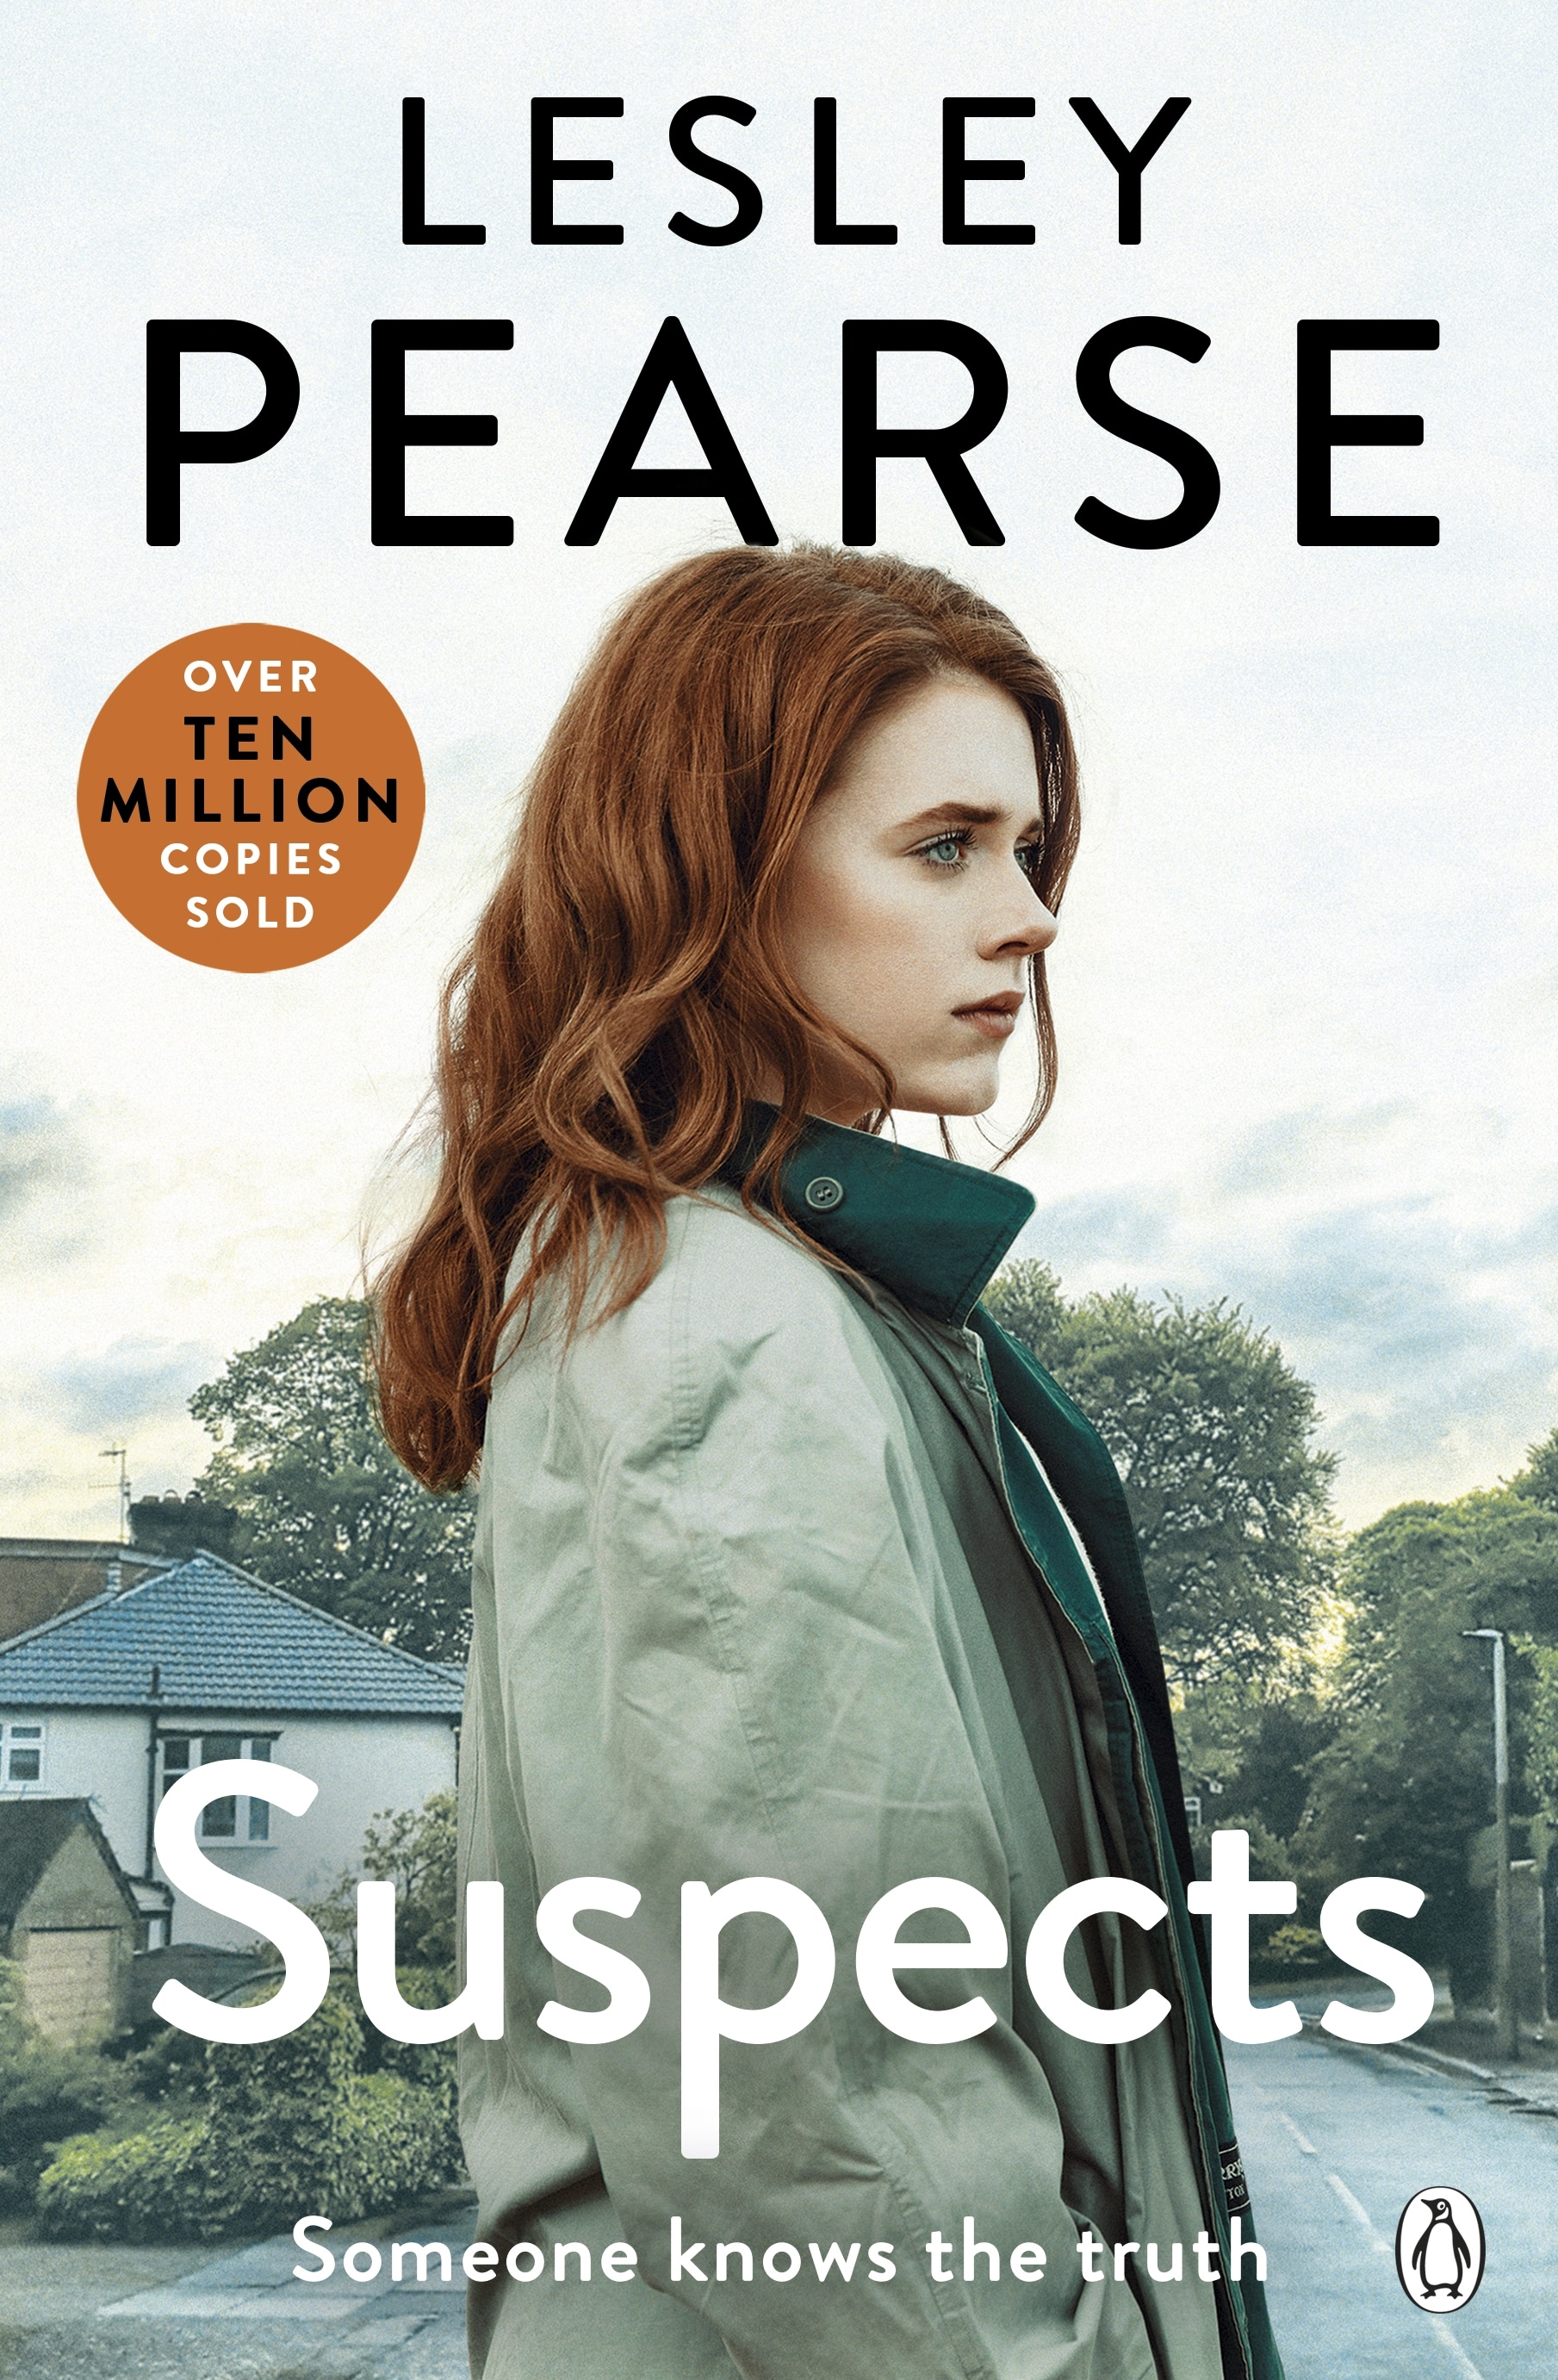 Book “Suspects” by Lesley Pearse — March 3, 2022